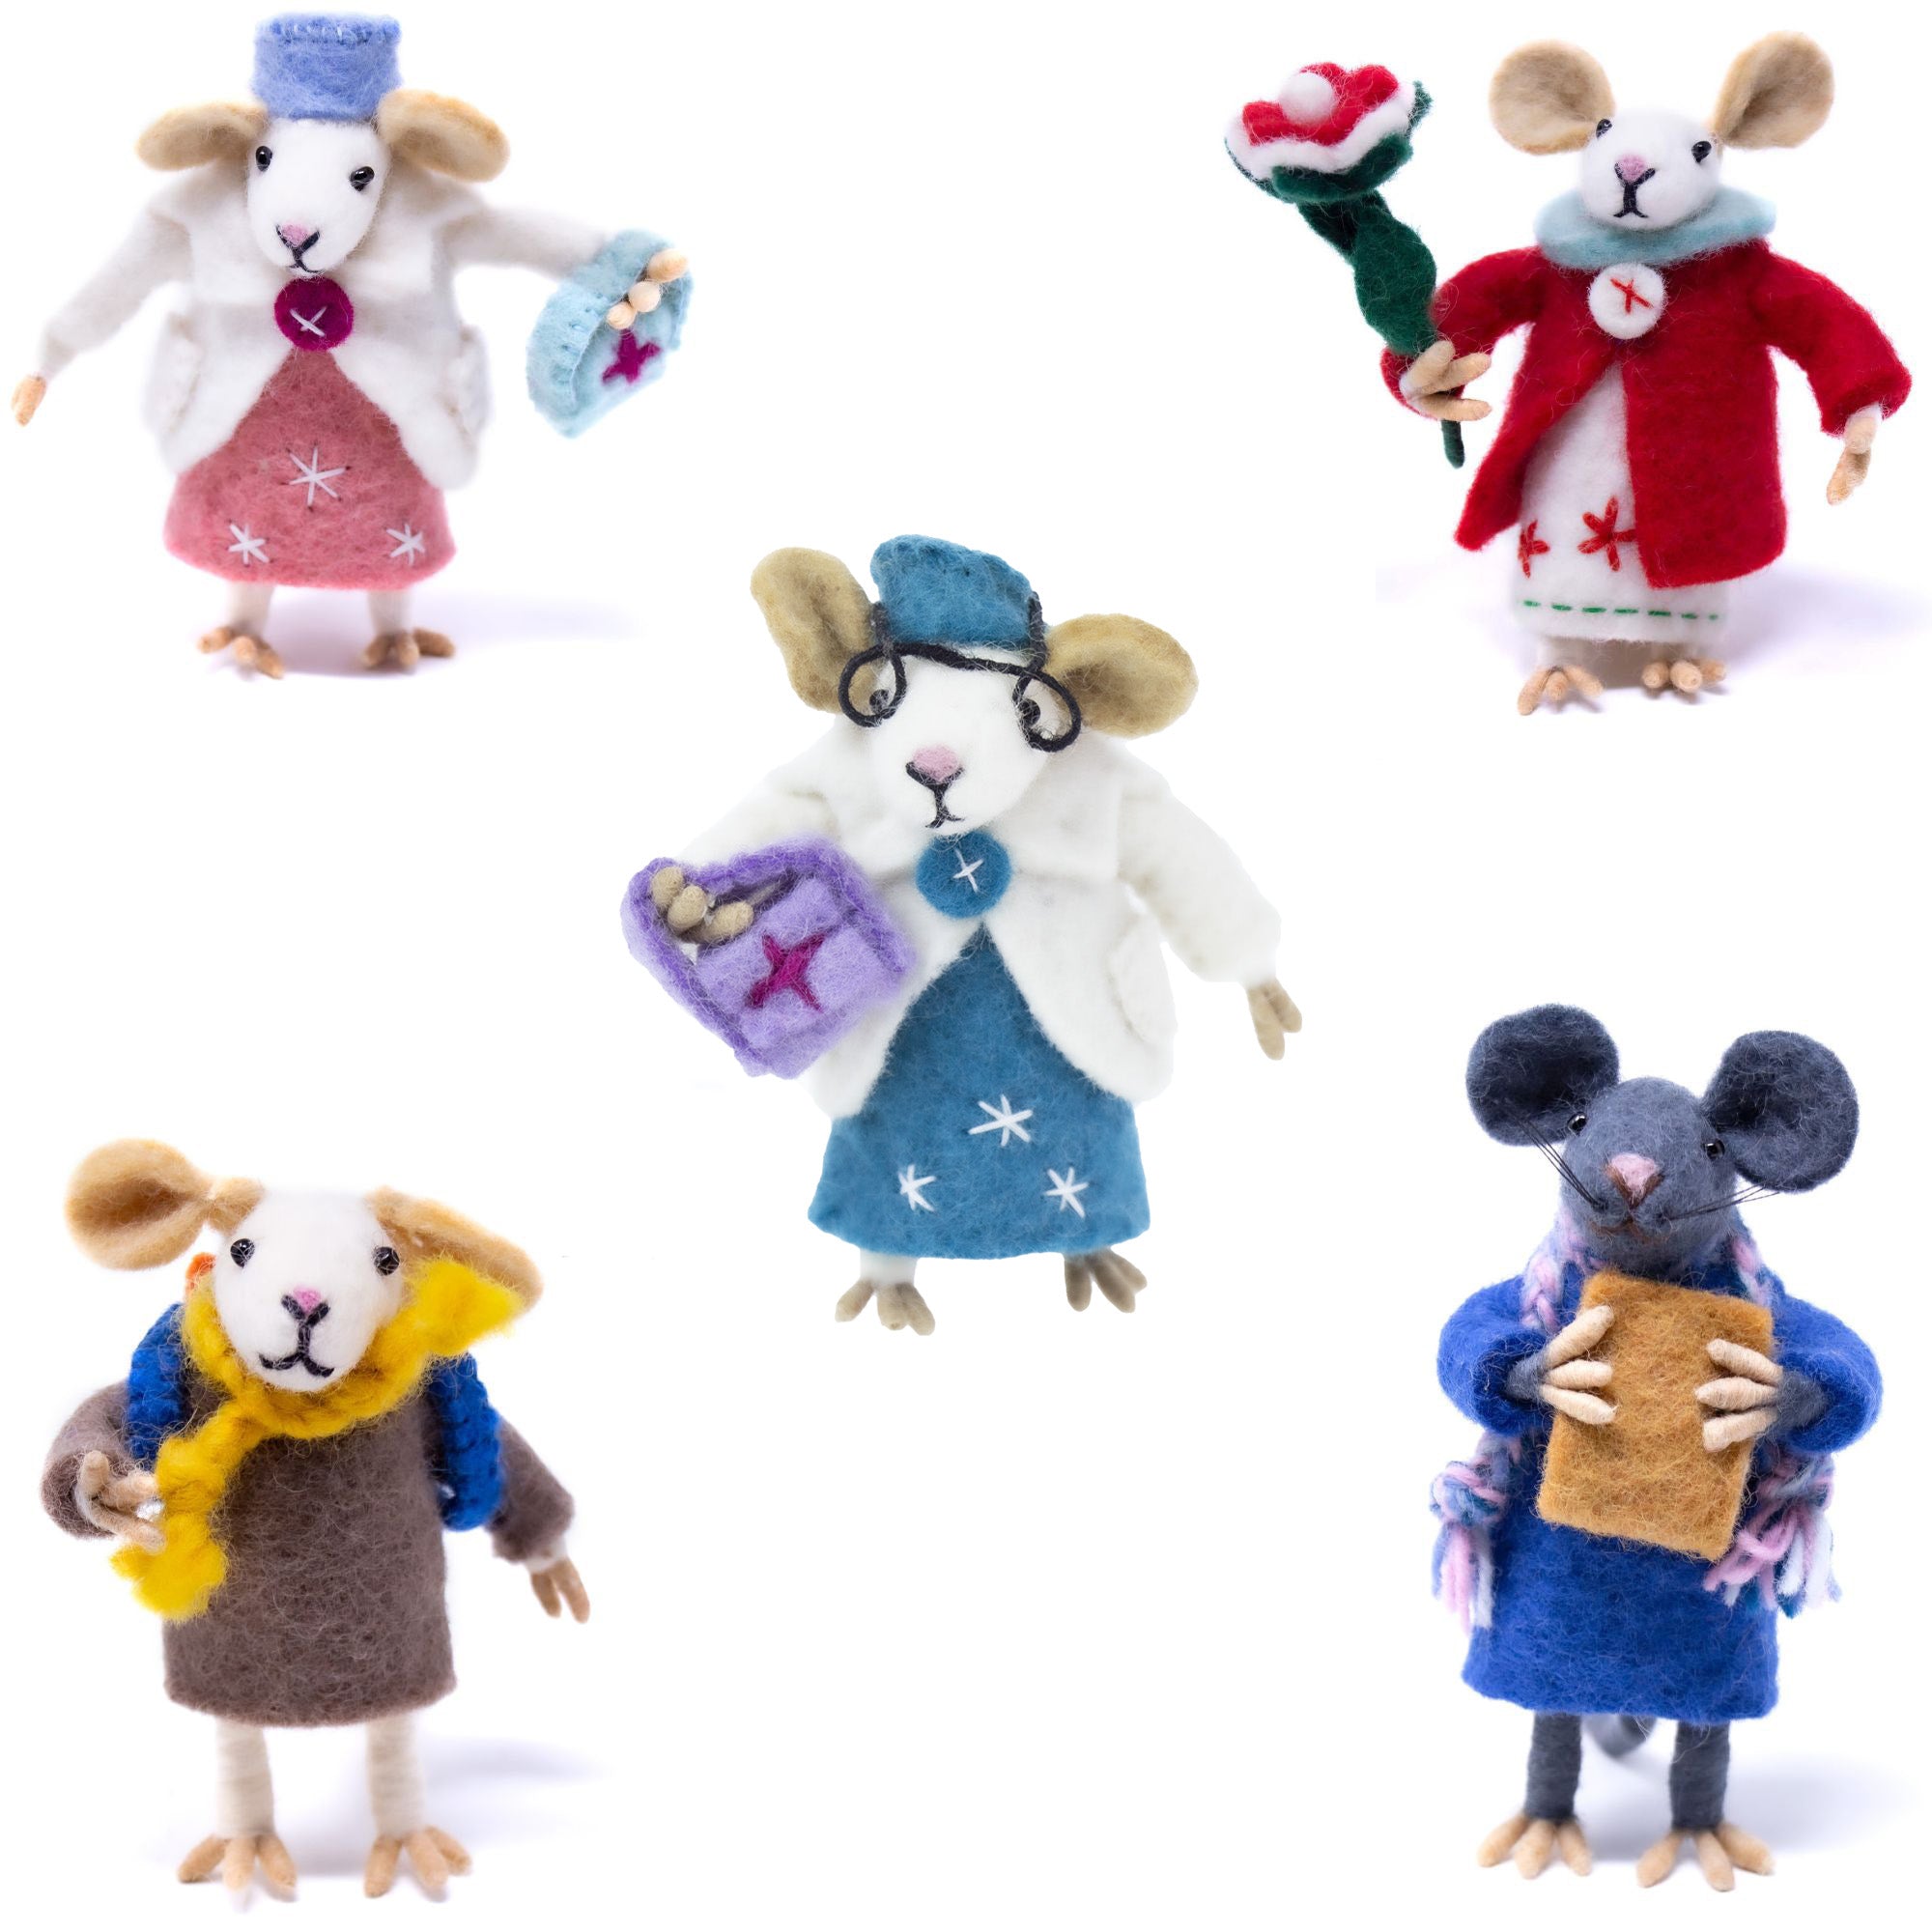 Set of Five Family Mouse Collectibles Handmade Felt Decor